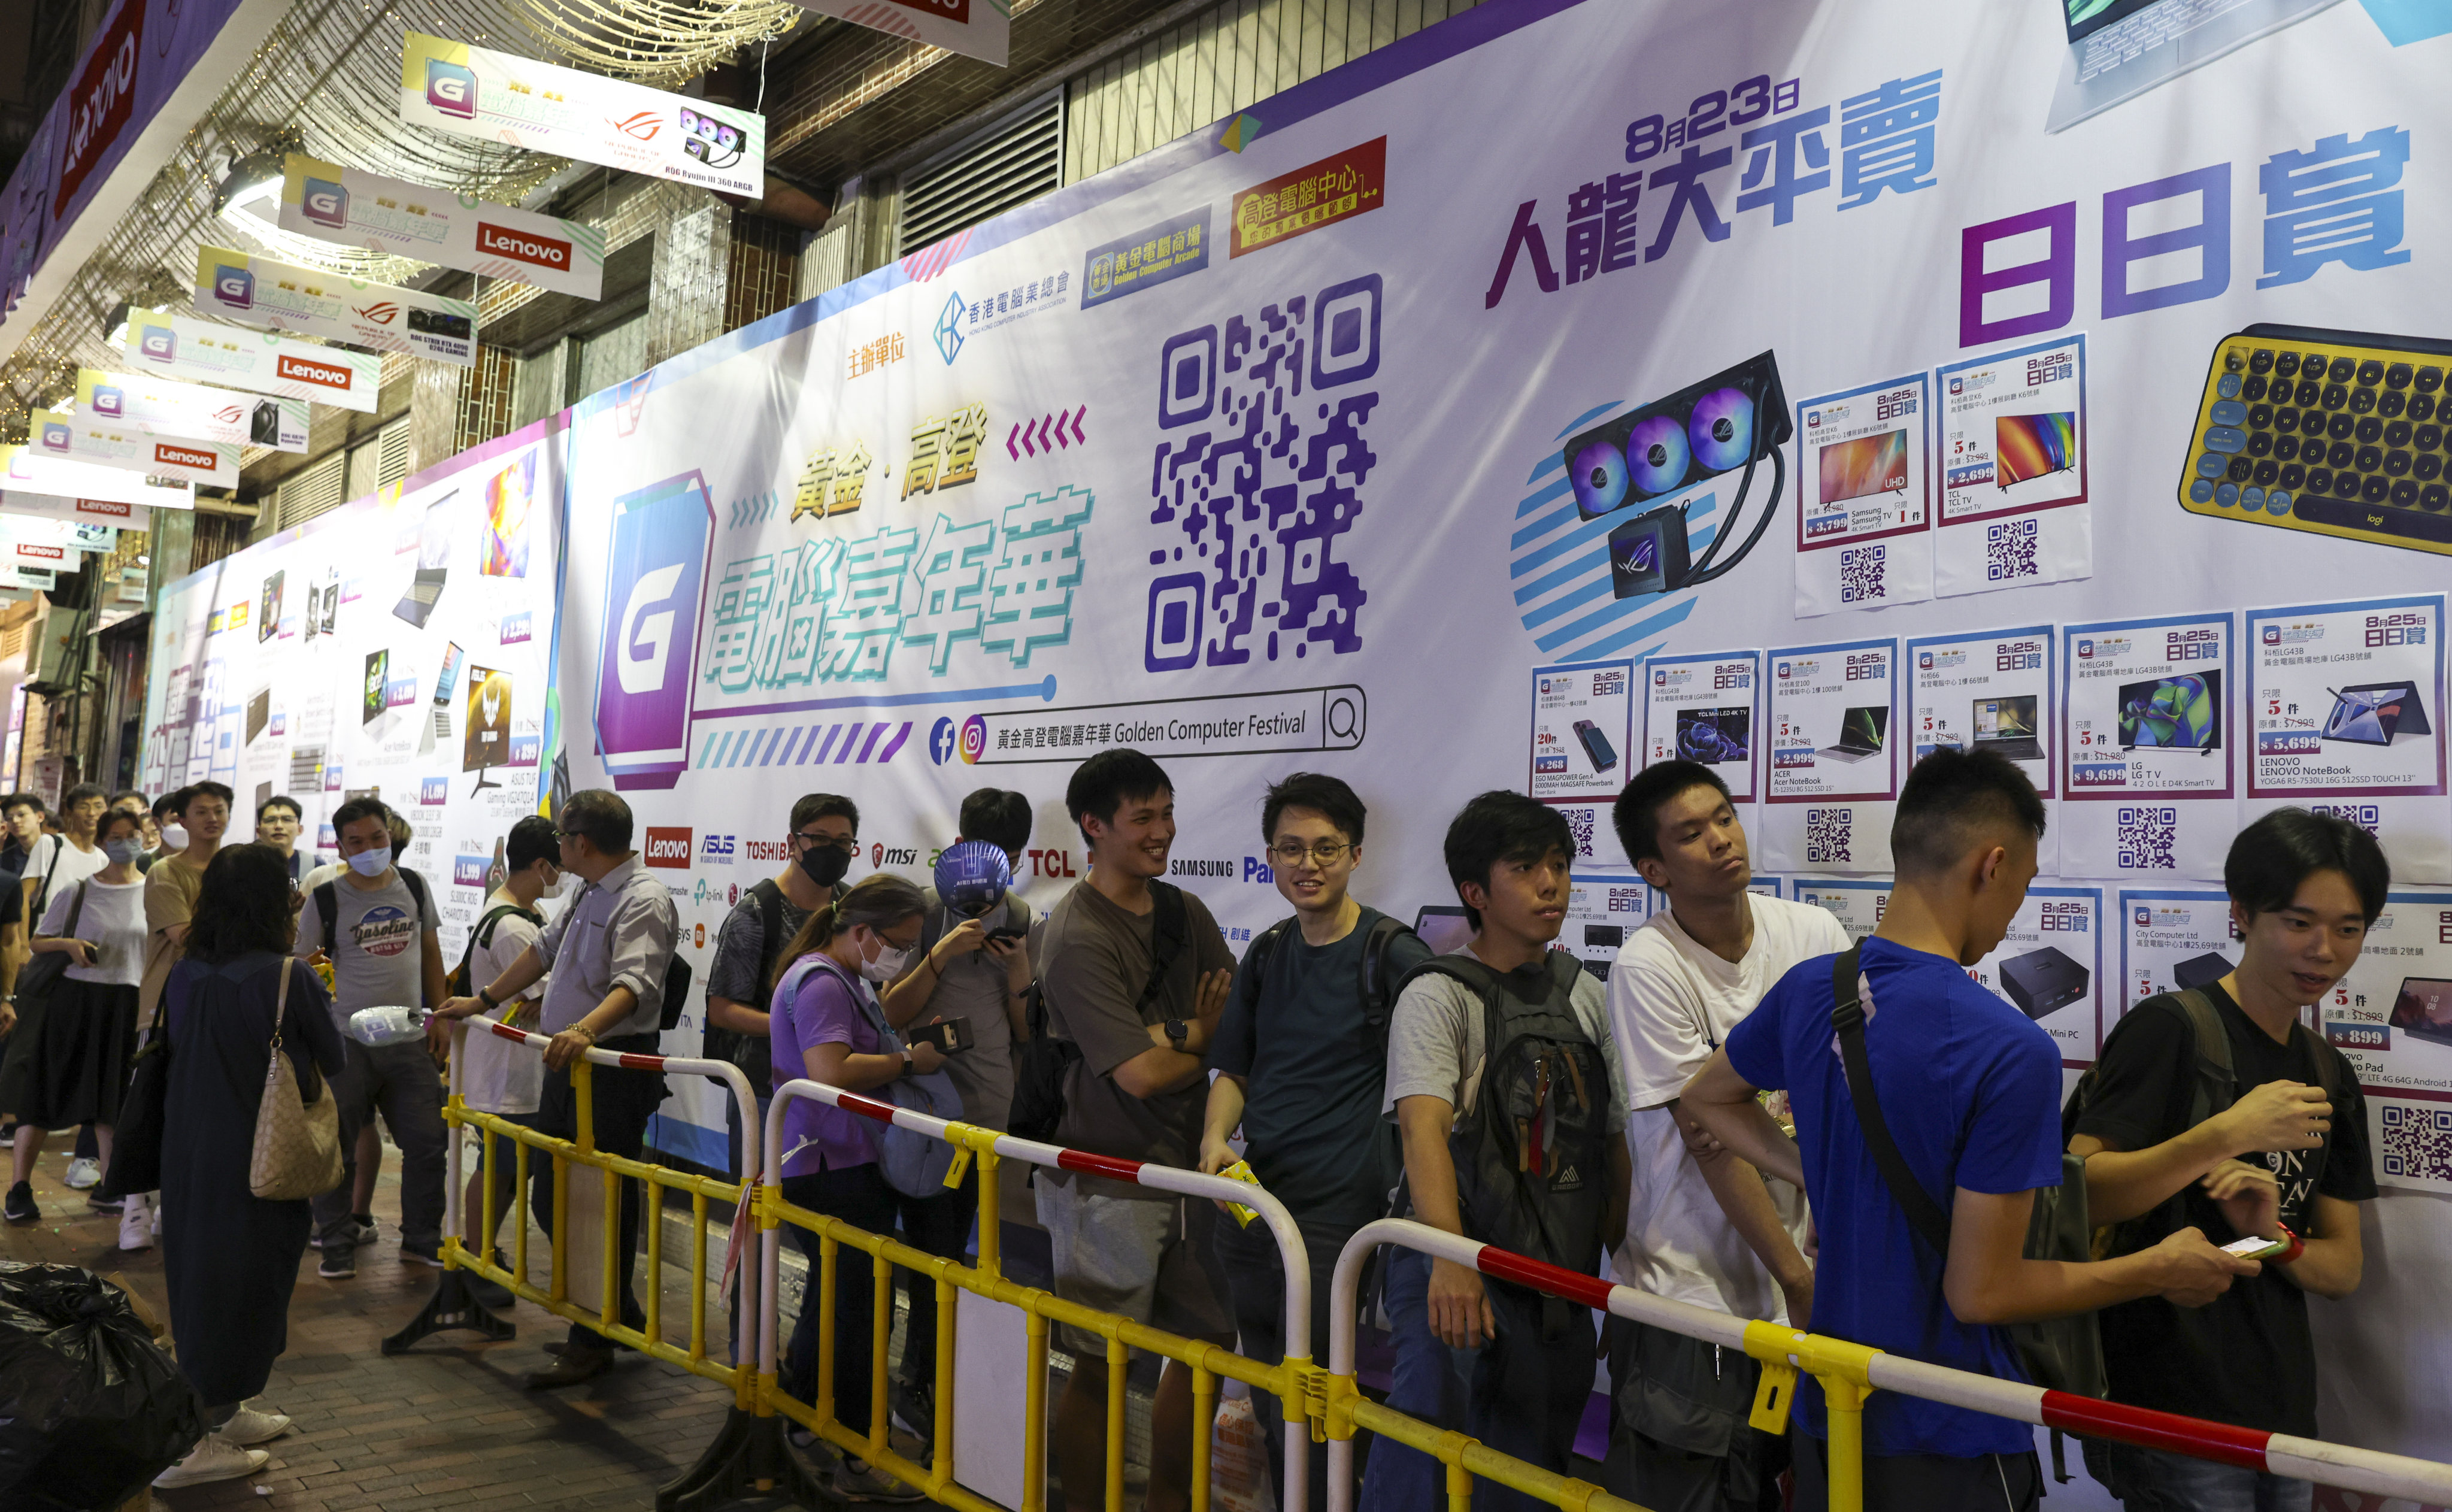 Customers queue up for bargains at the Golden Computer Centre on Friday night. Photo: Yik Yeung-man